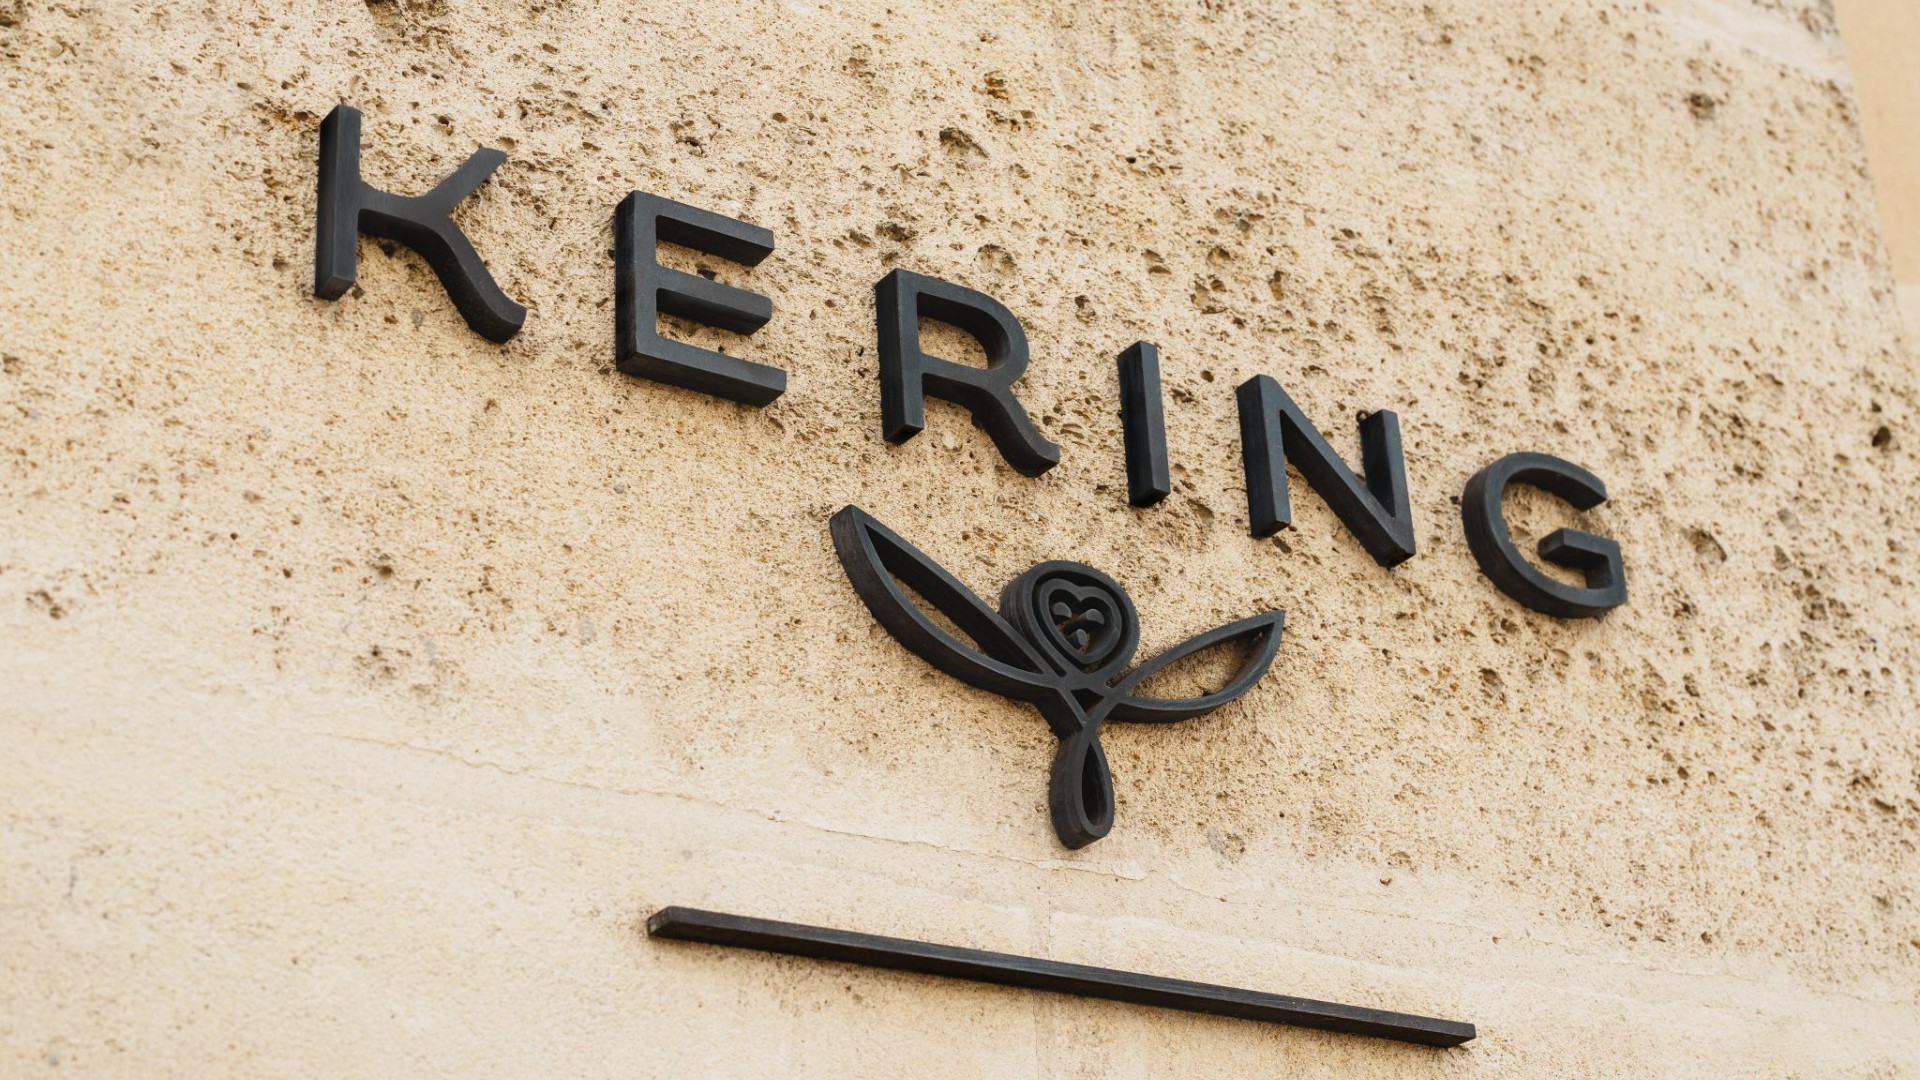 Kering Does not grow in the penultimate quarter of 2023